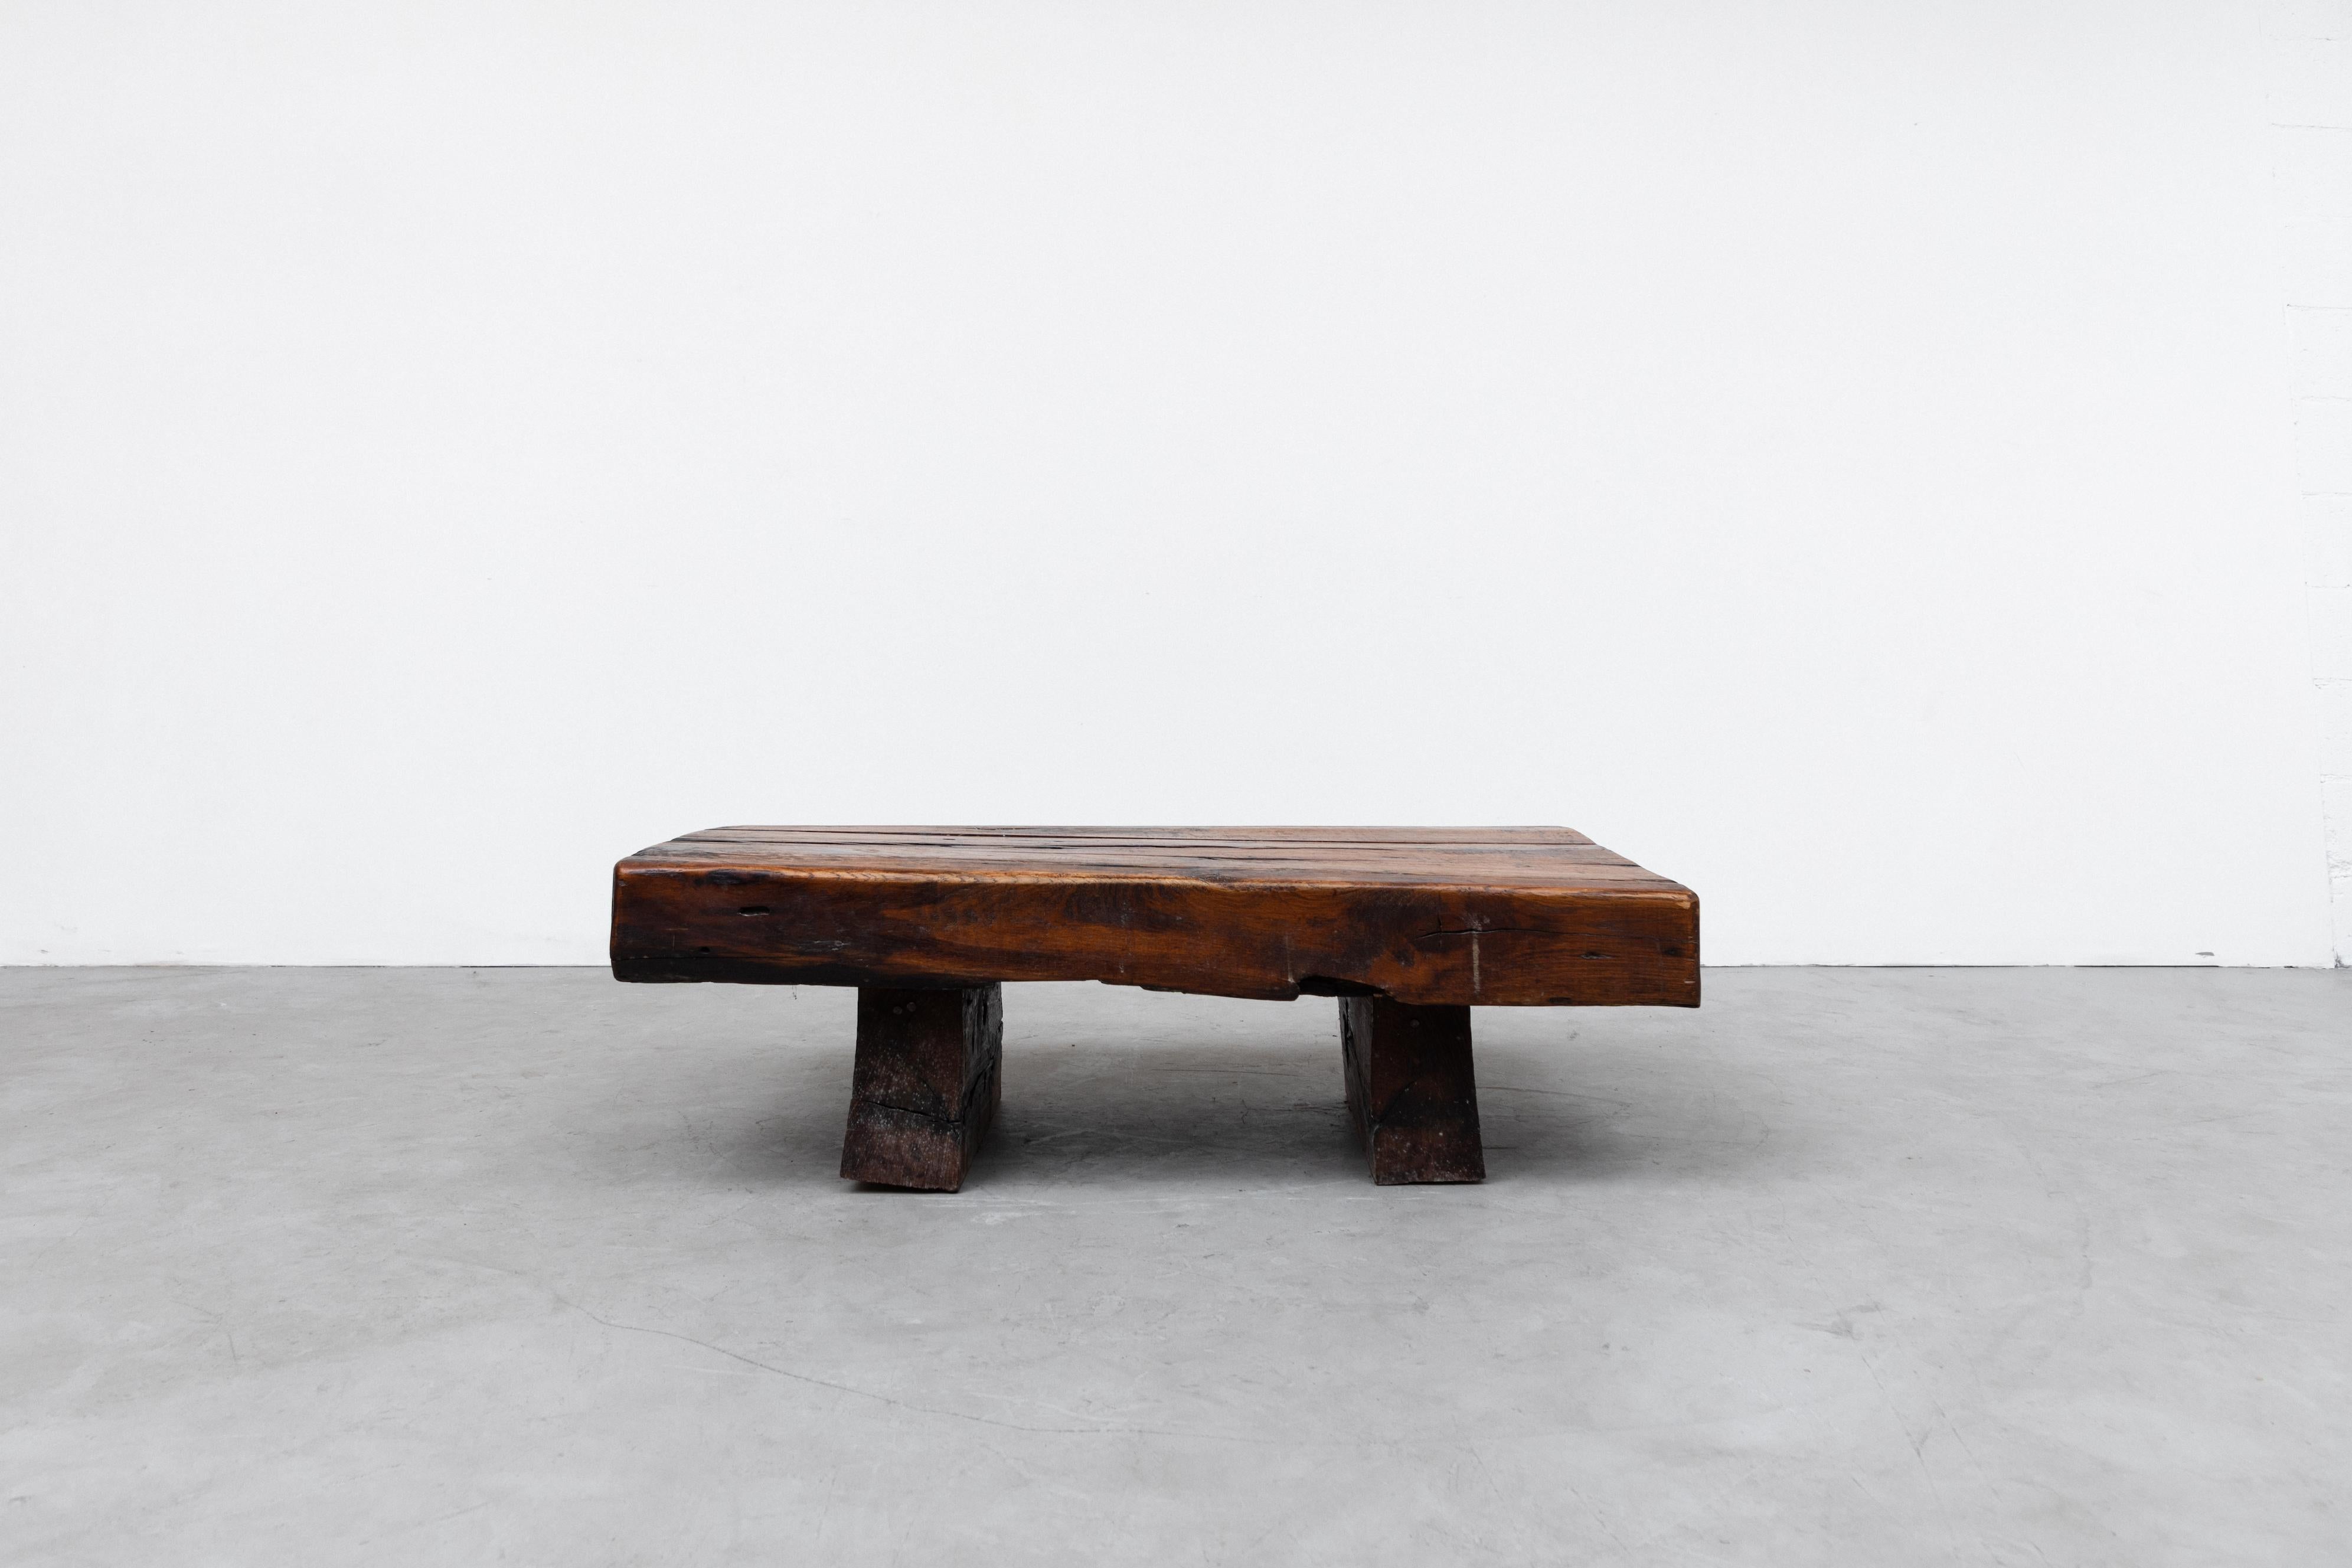 Heavy mid-century railroad tie coffee table in original condition with solid wood legs. Visible wear and scratching consistent with age and use. A similar round coffee table also available and listed separately (LU922424459652).